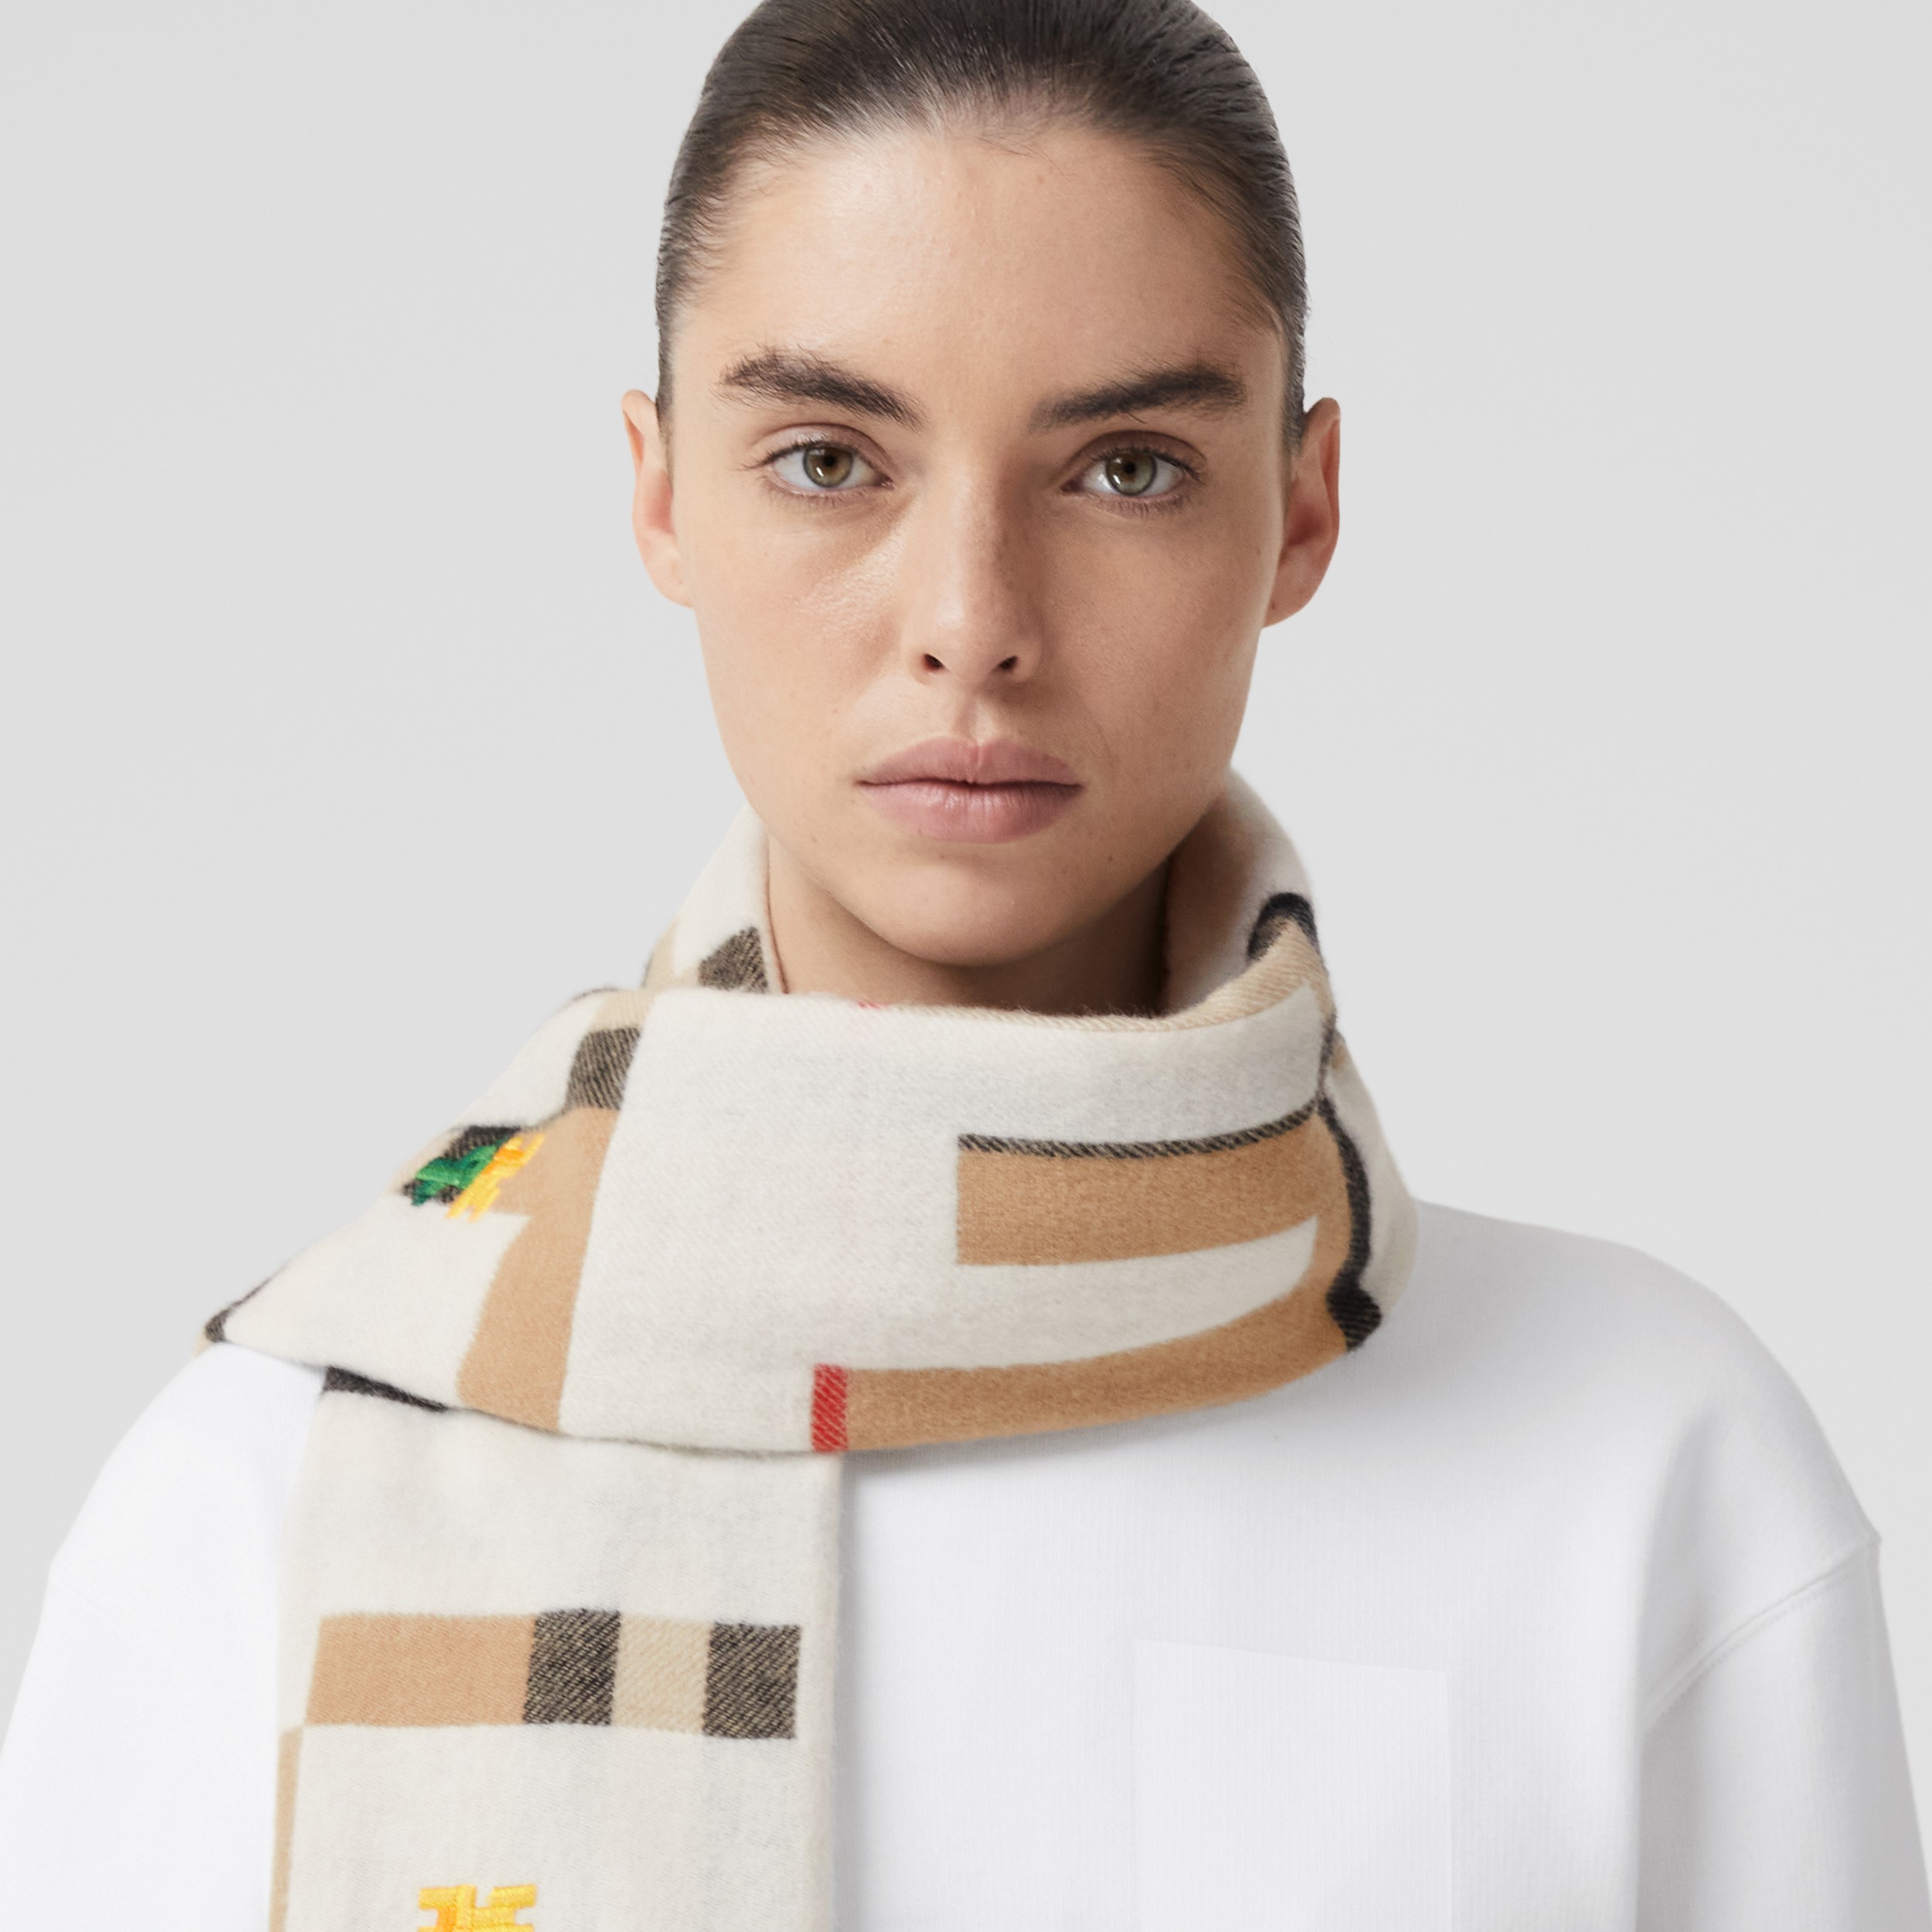 Wide Check Cashmere Scarf in Archive Beige